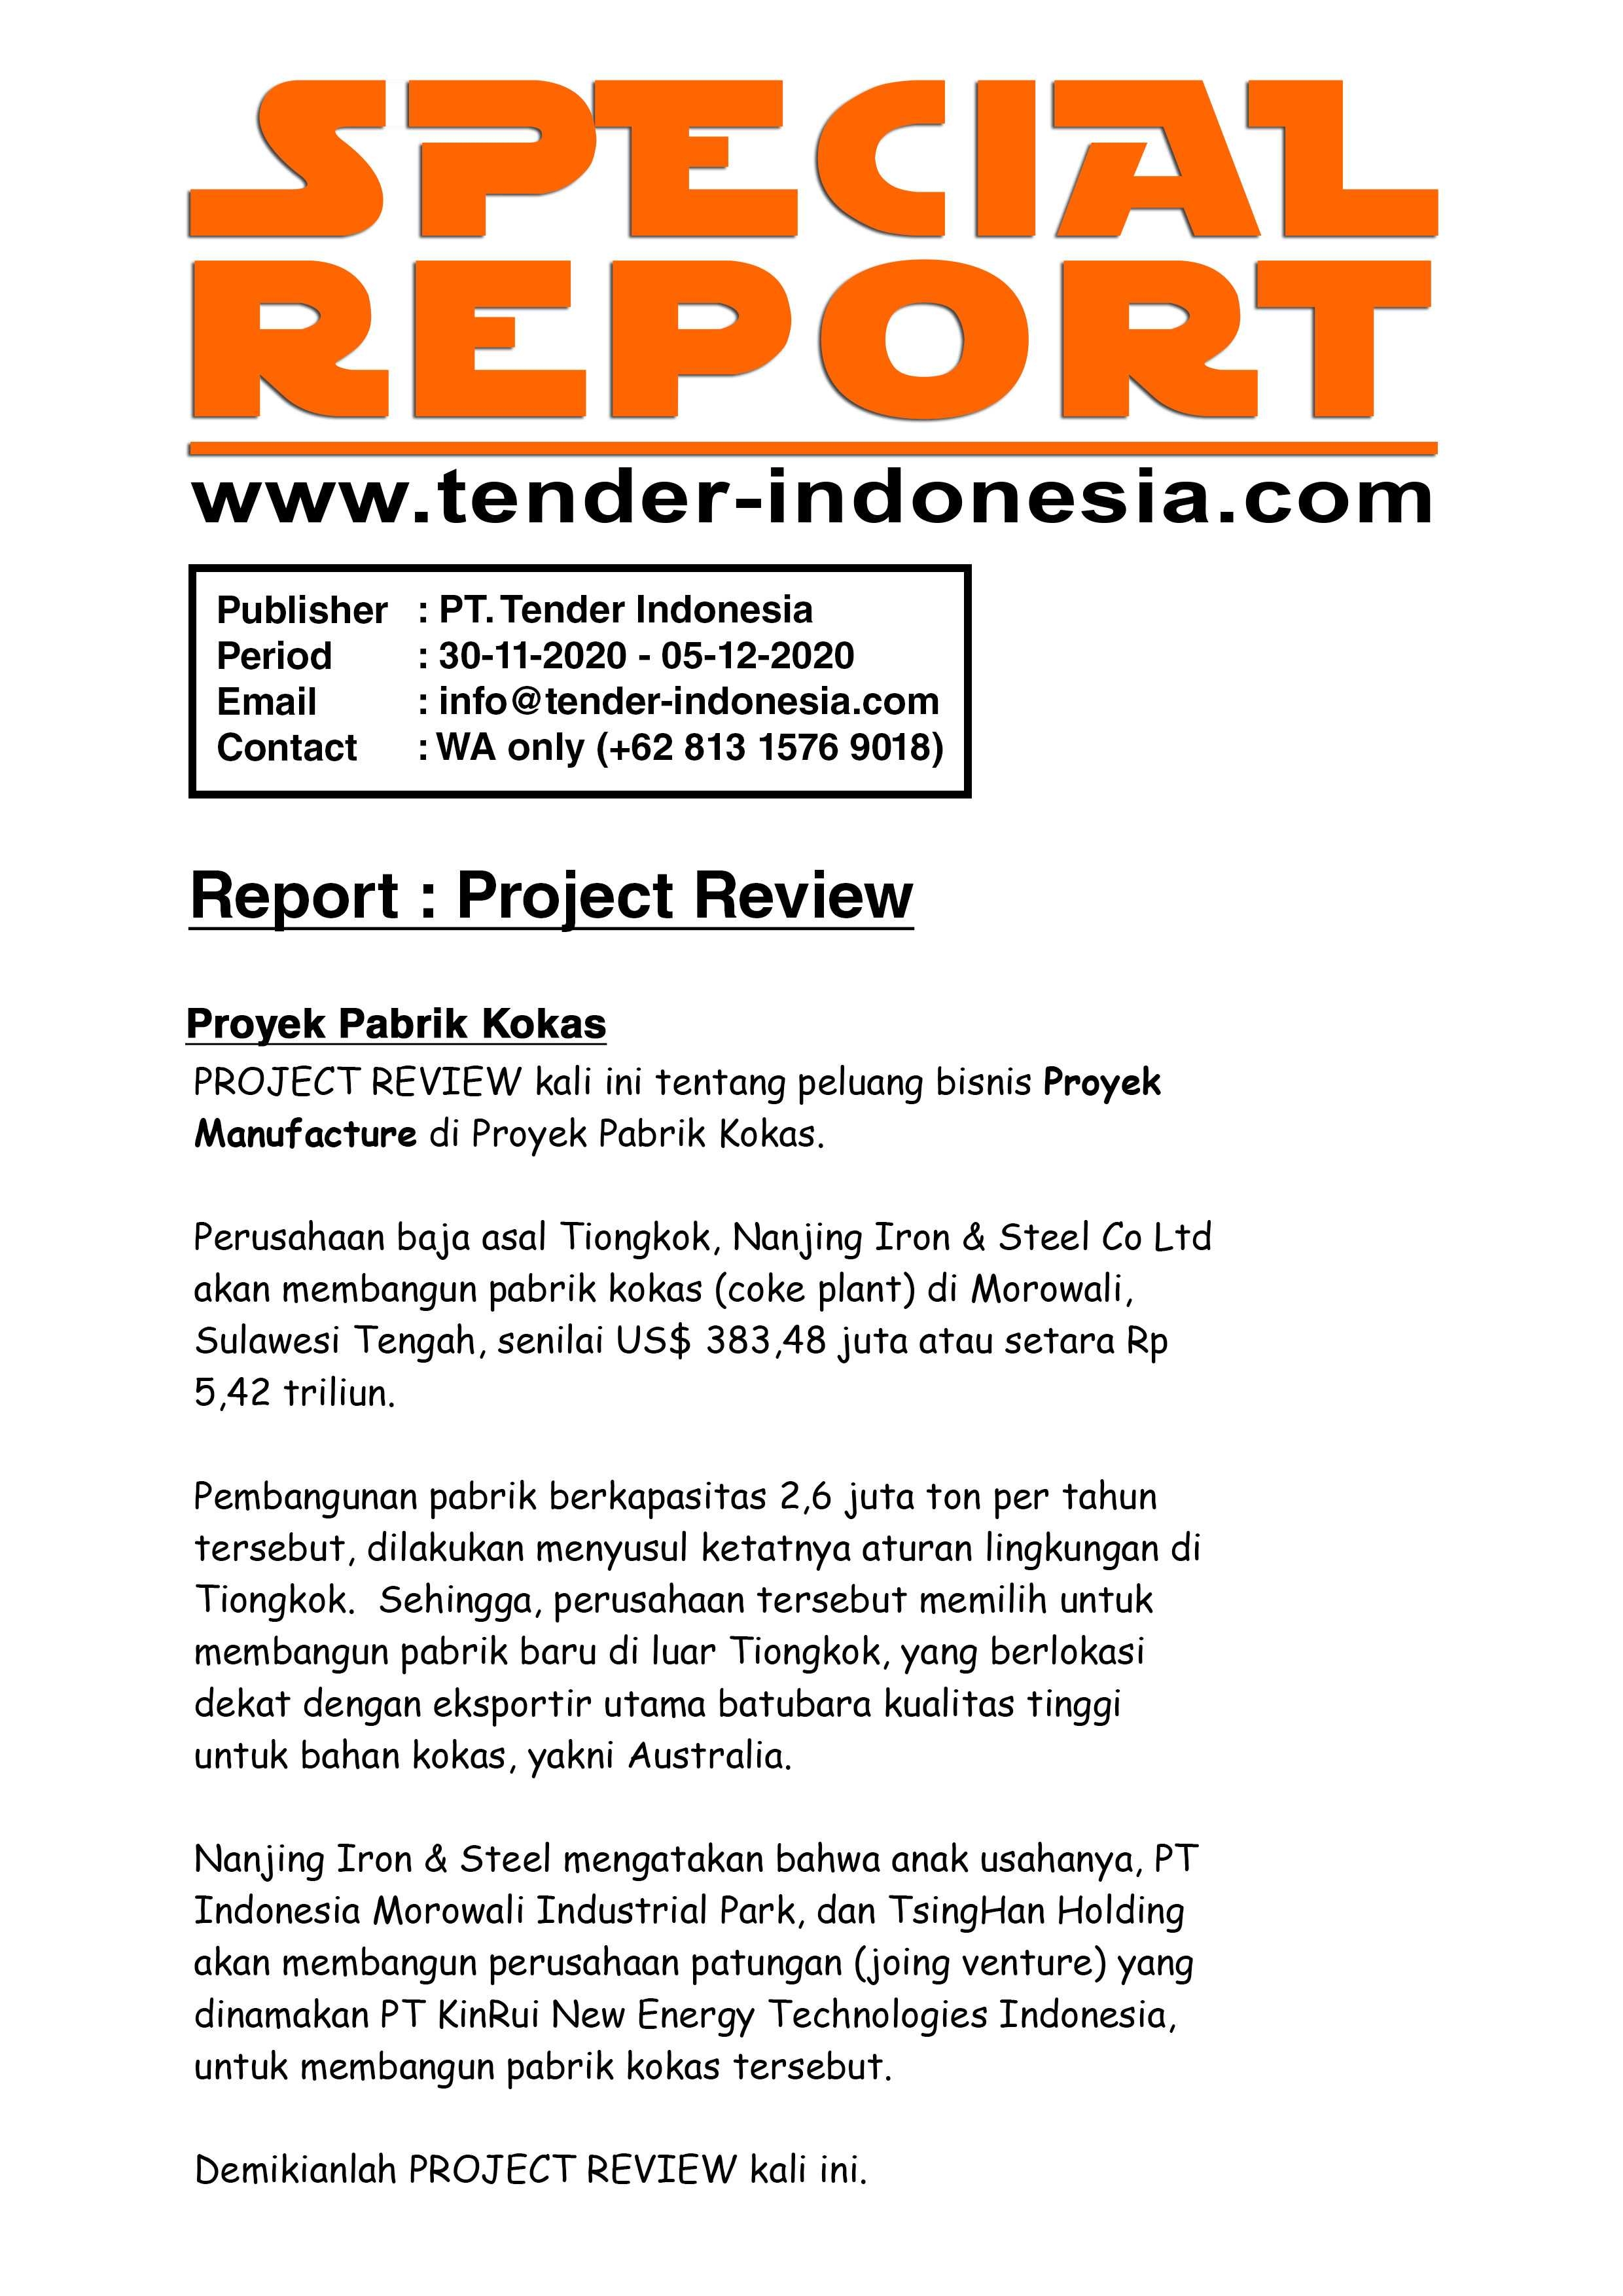 Weekly Project Review (Edisi 30 November - 05 Desember 2020)